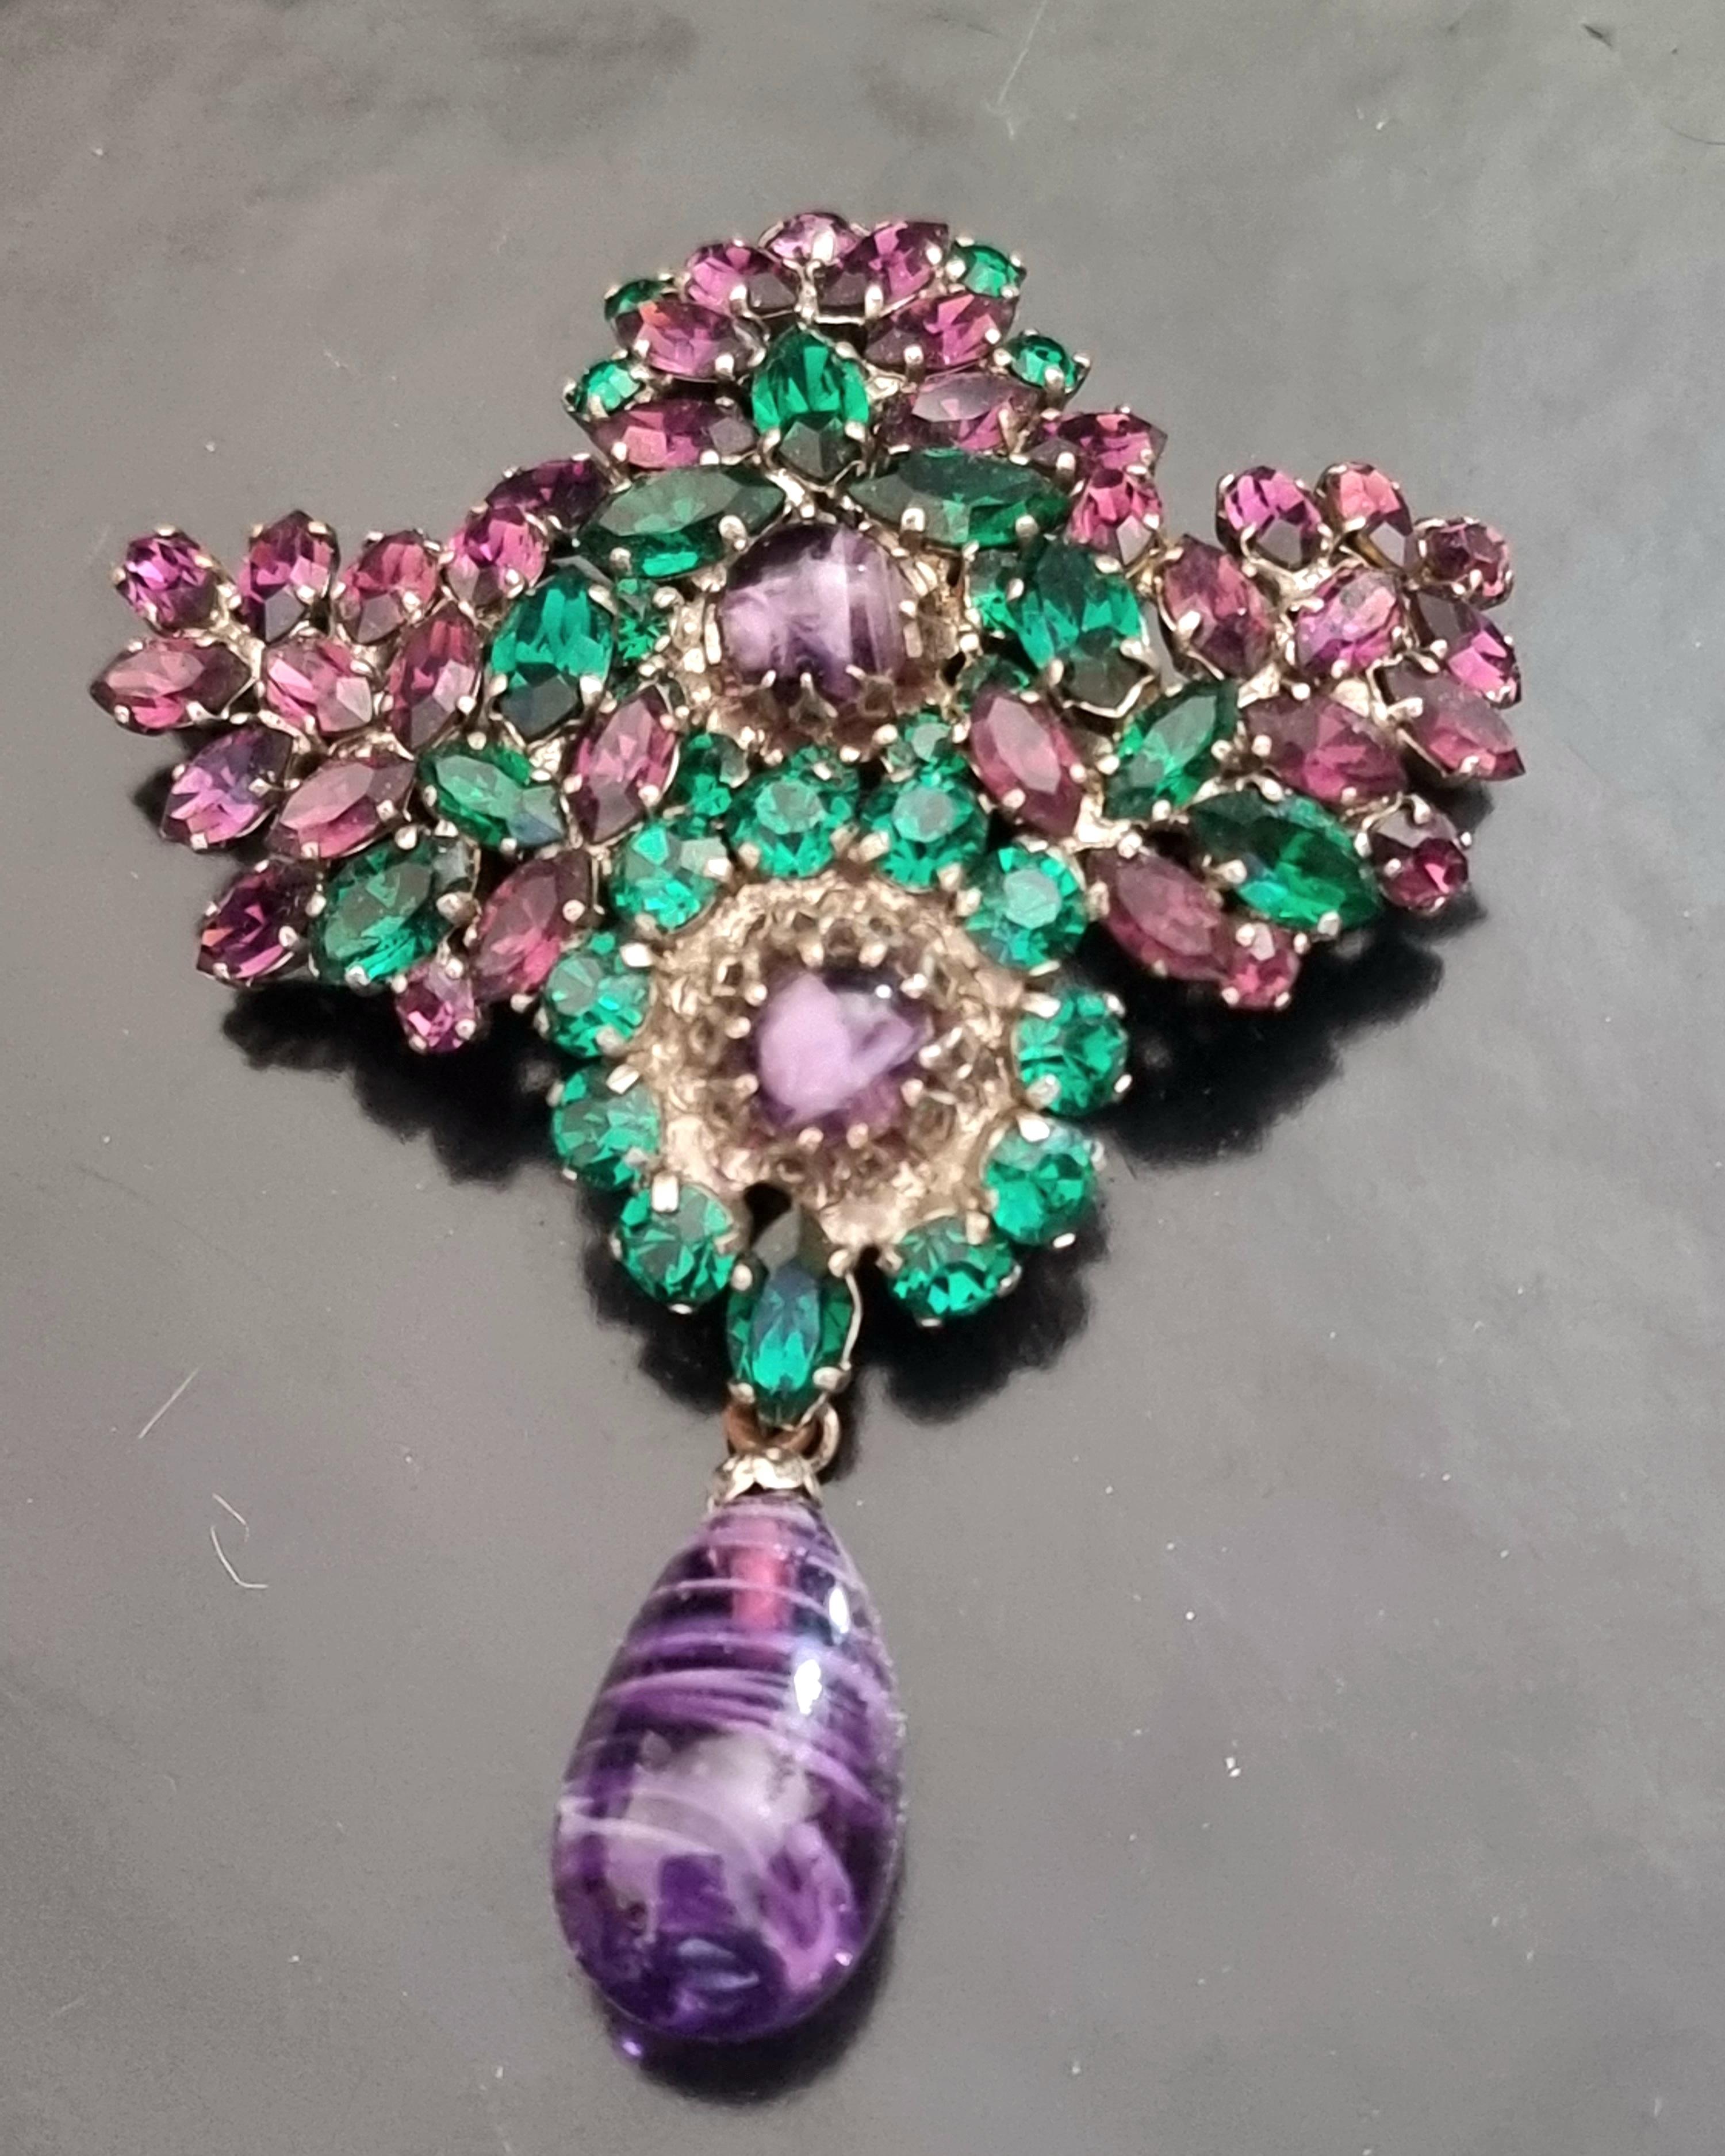 Magnificent old BROOCH,
vintage 50's,
glass rhinestones, glass beads,
by Haute Couture designer ROGER Jean Pierre,
dimensions 9 x 6 cm, weight 29 g,
good condition.

The jeweler and designer, famous French parurier ROGER Jean Pierre has been